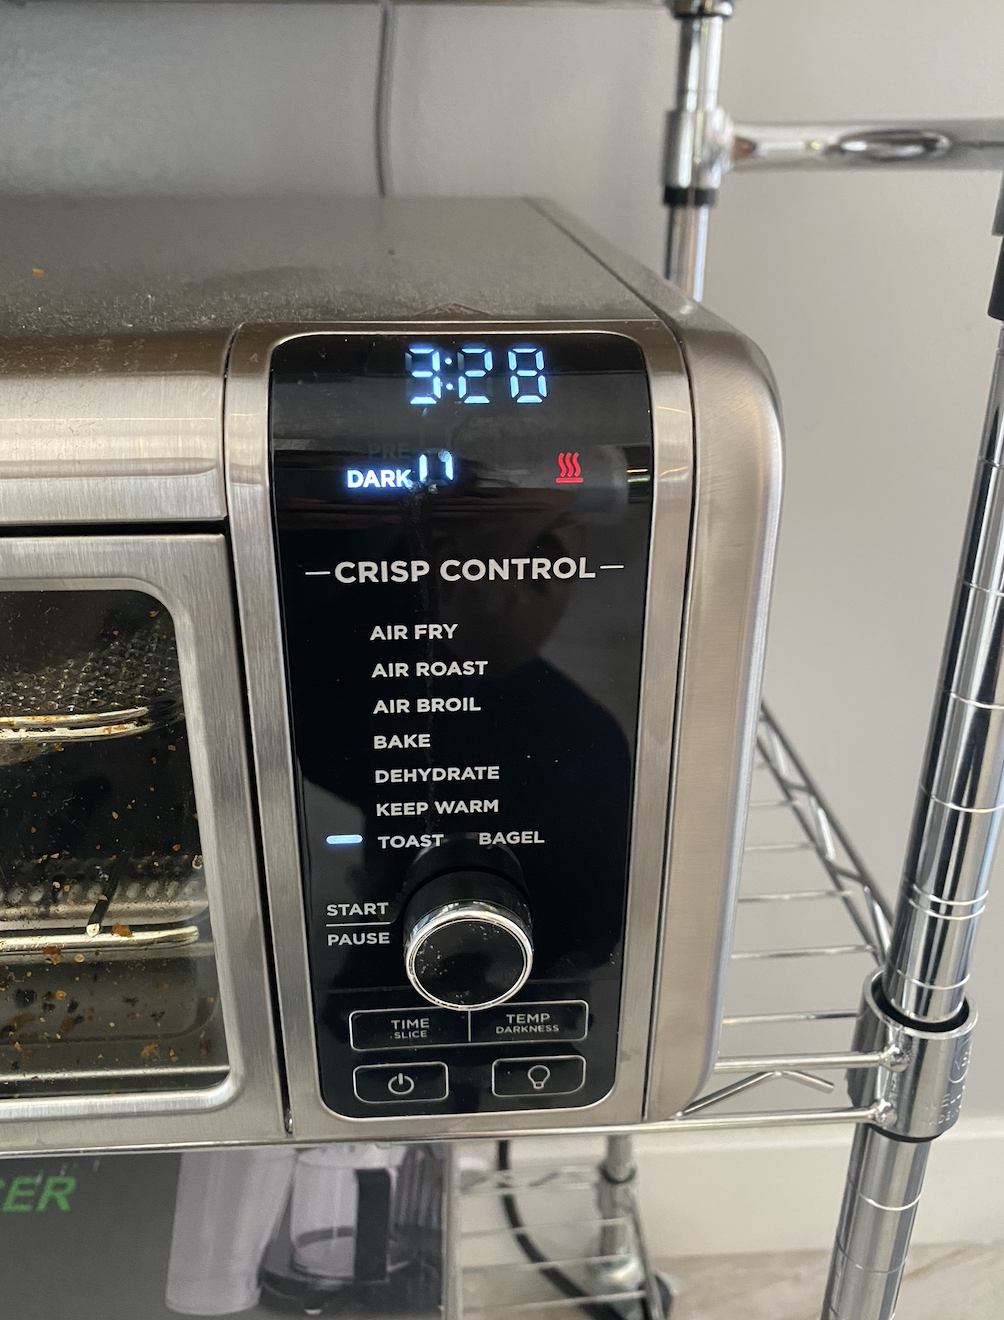 Air fryer panel with &quot;toast bagel&quot; selected for crisp control and &quot;dark,&quot; and 3:28 left for the time